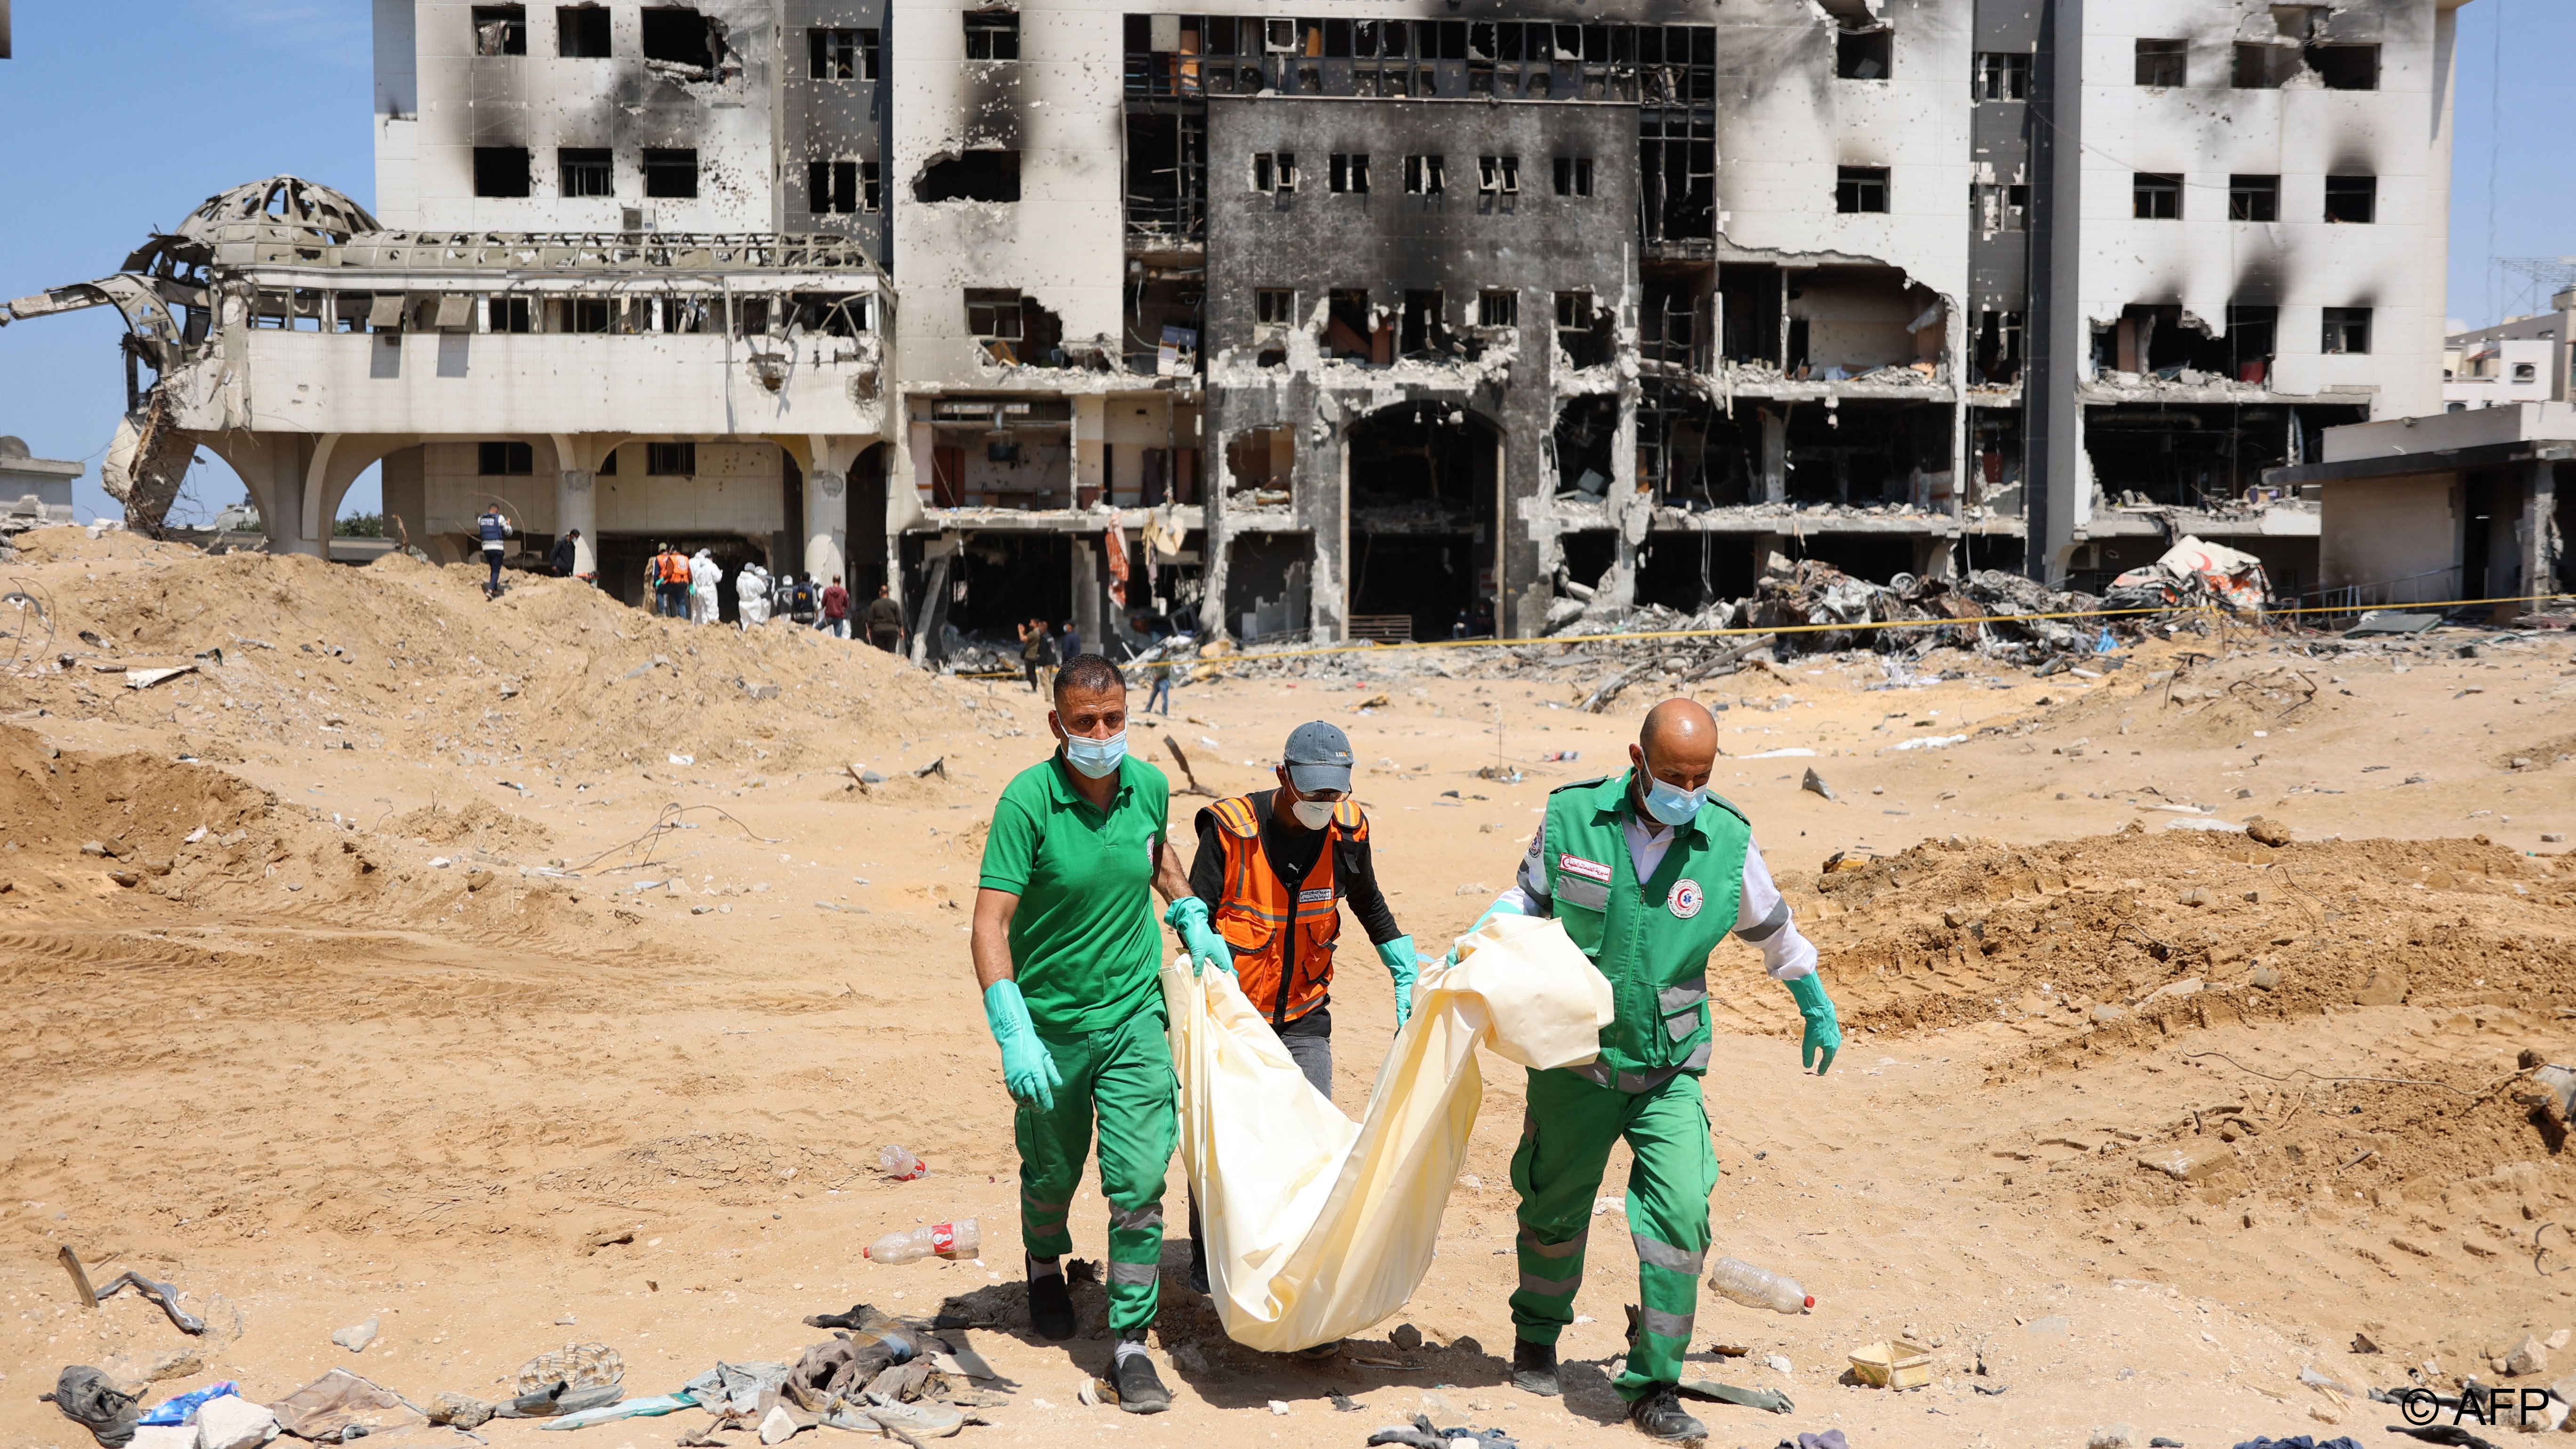 Palestinian civil defence staff recover human remains in the grounds of Gaza's Al-Shifa hospital, which was largely destroyed during an army raid that Israel said targeted hundreds of militants holed up inside